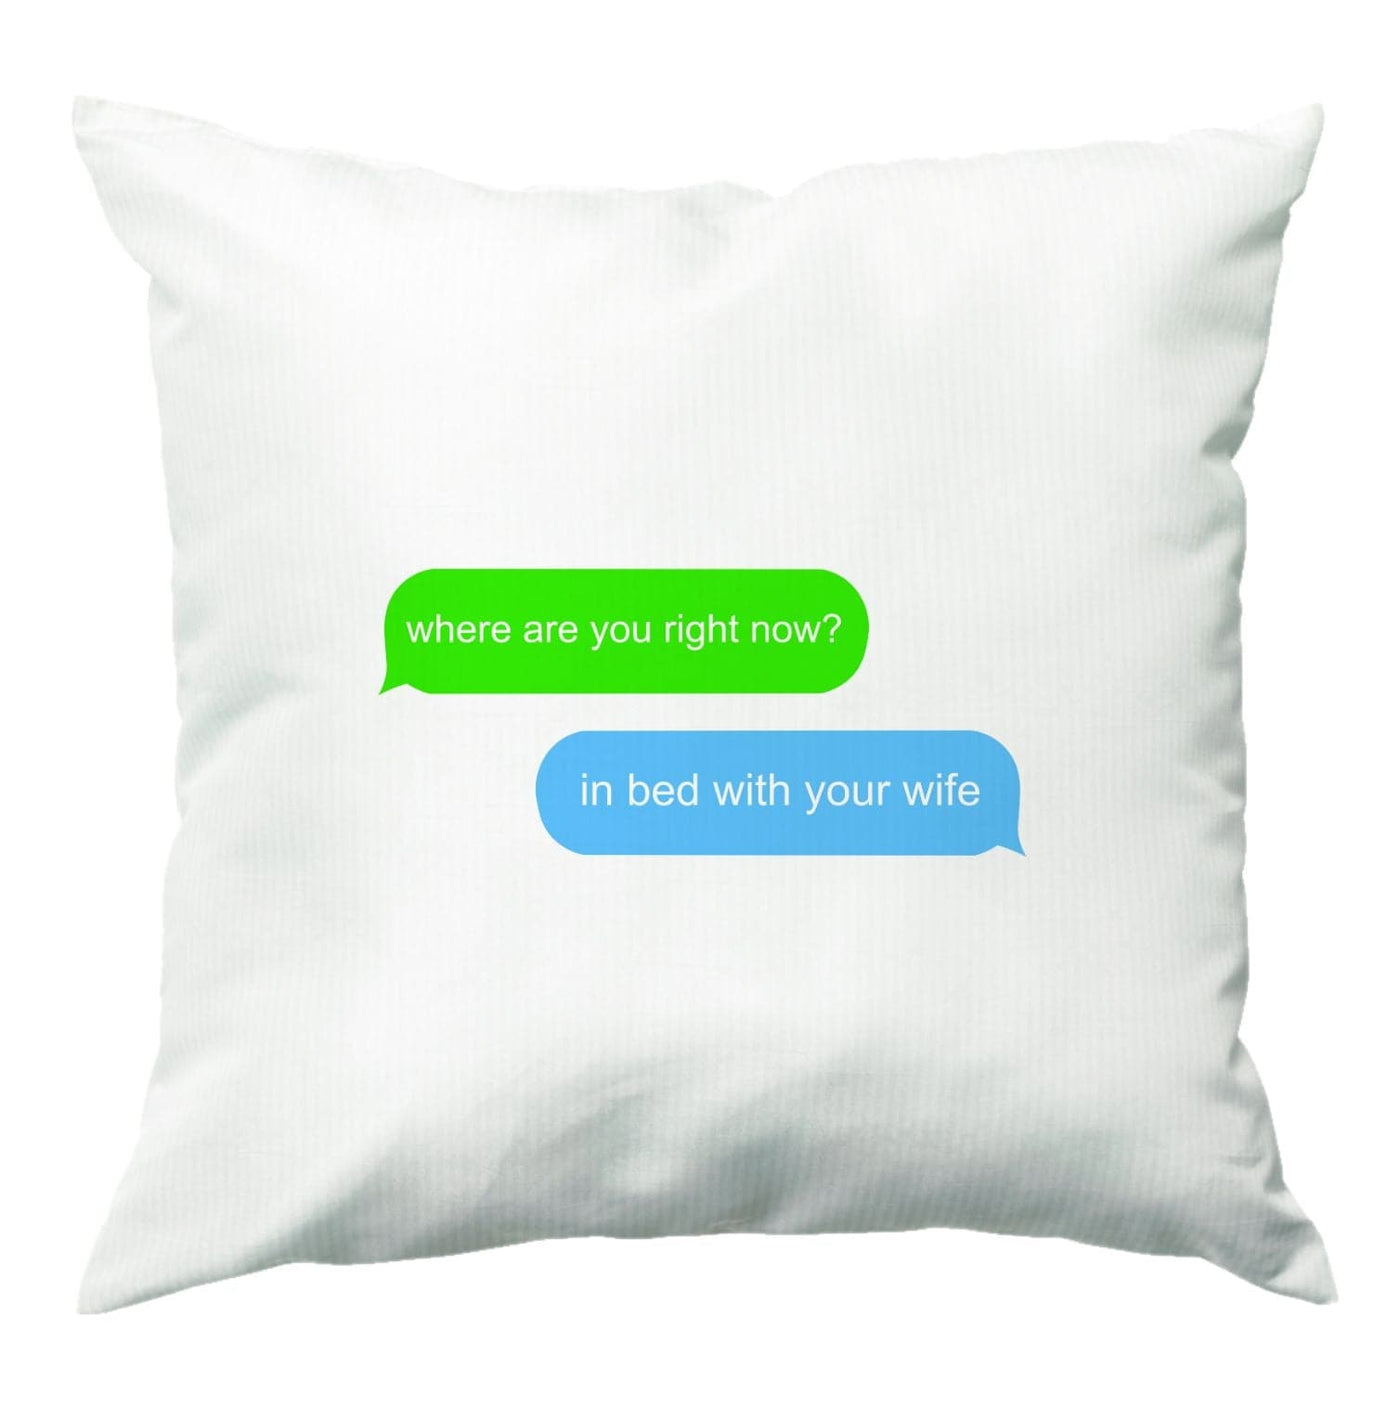 Where Are You Right Now? - Pete Davidson Cushion